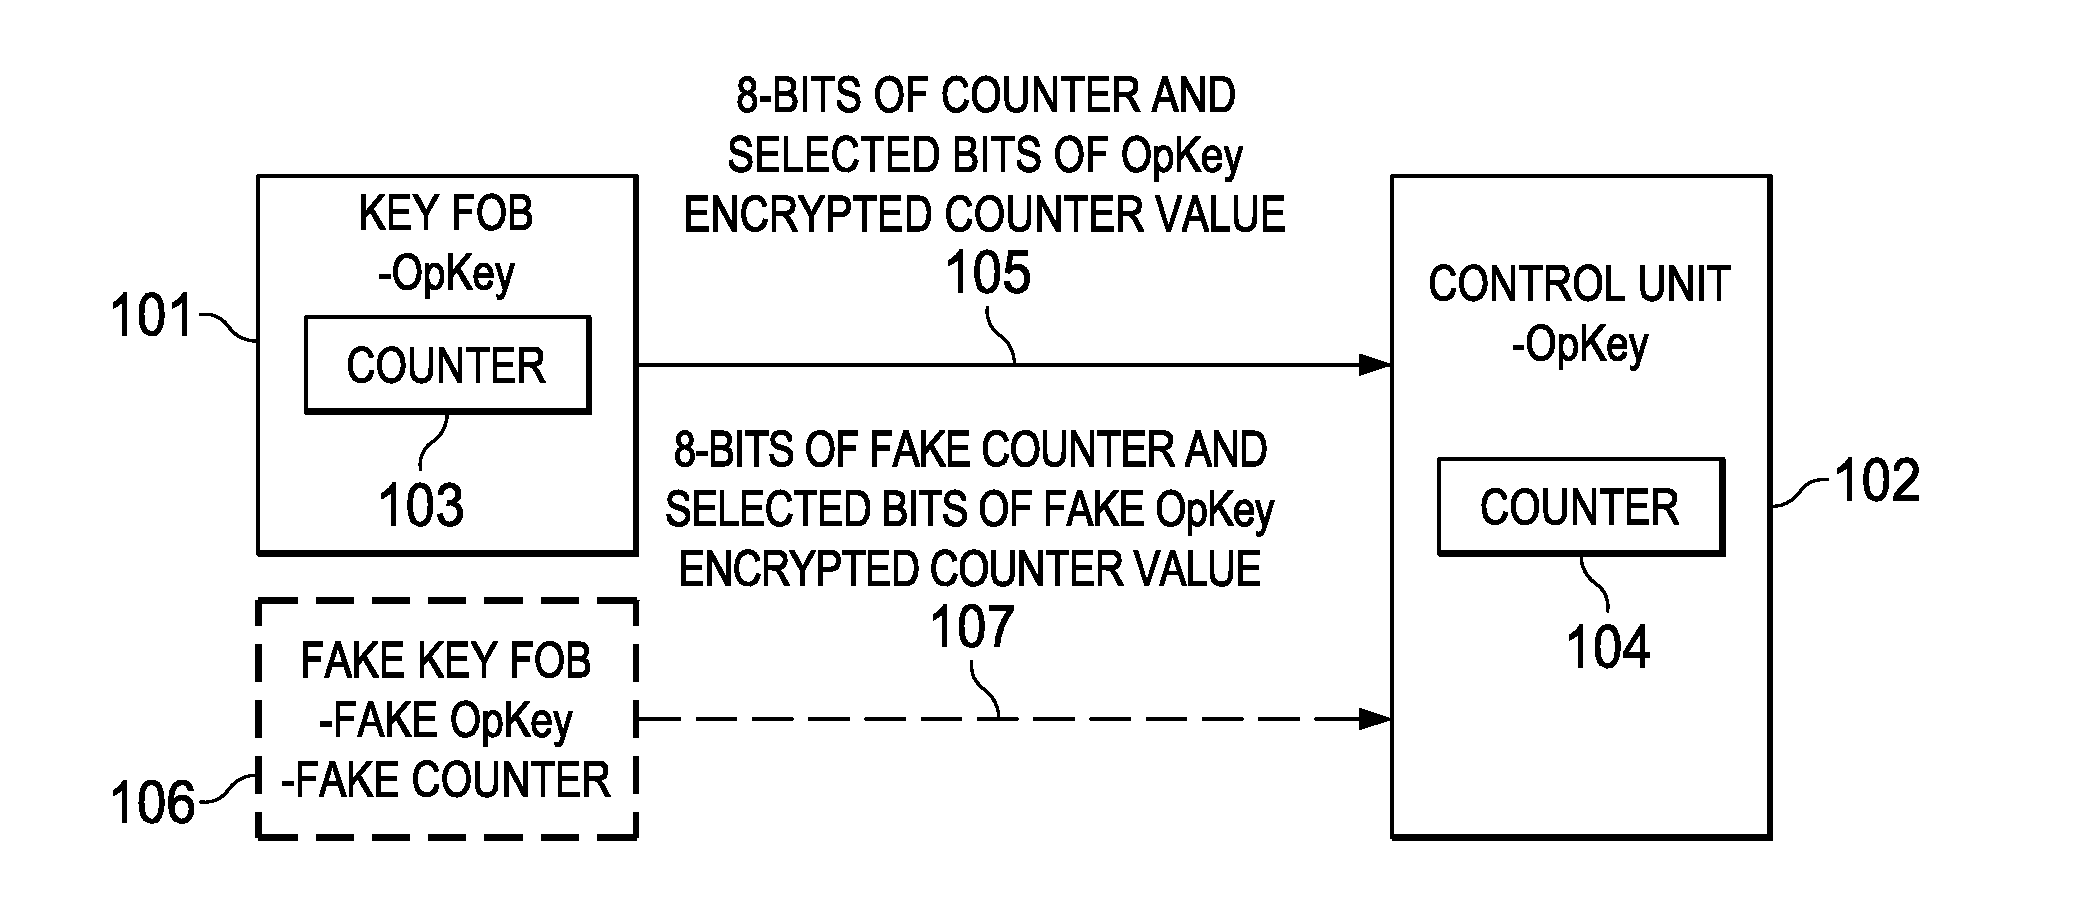 One-Way Key Fob and Vehicle Pairing Verification, Retention, and Revocation